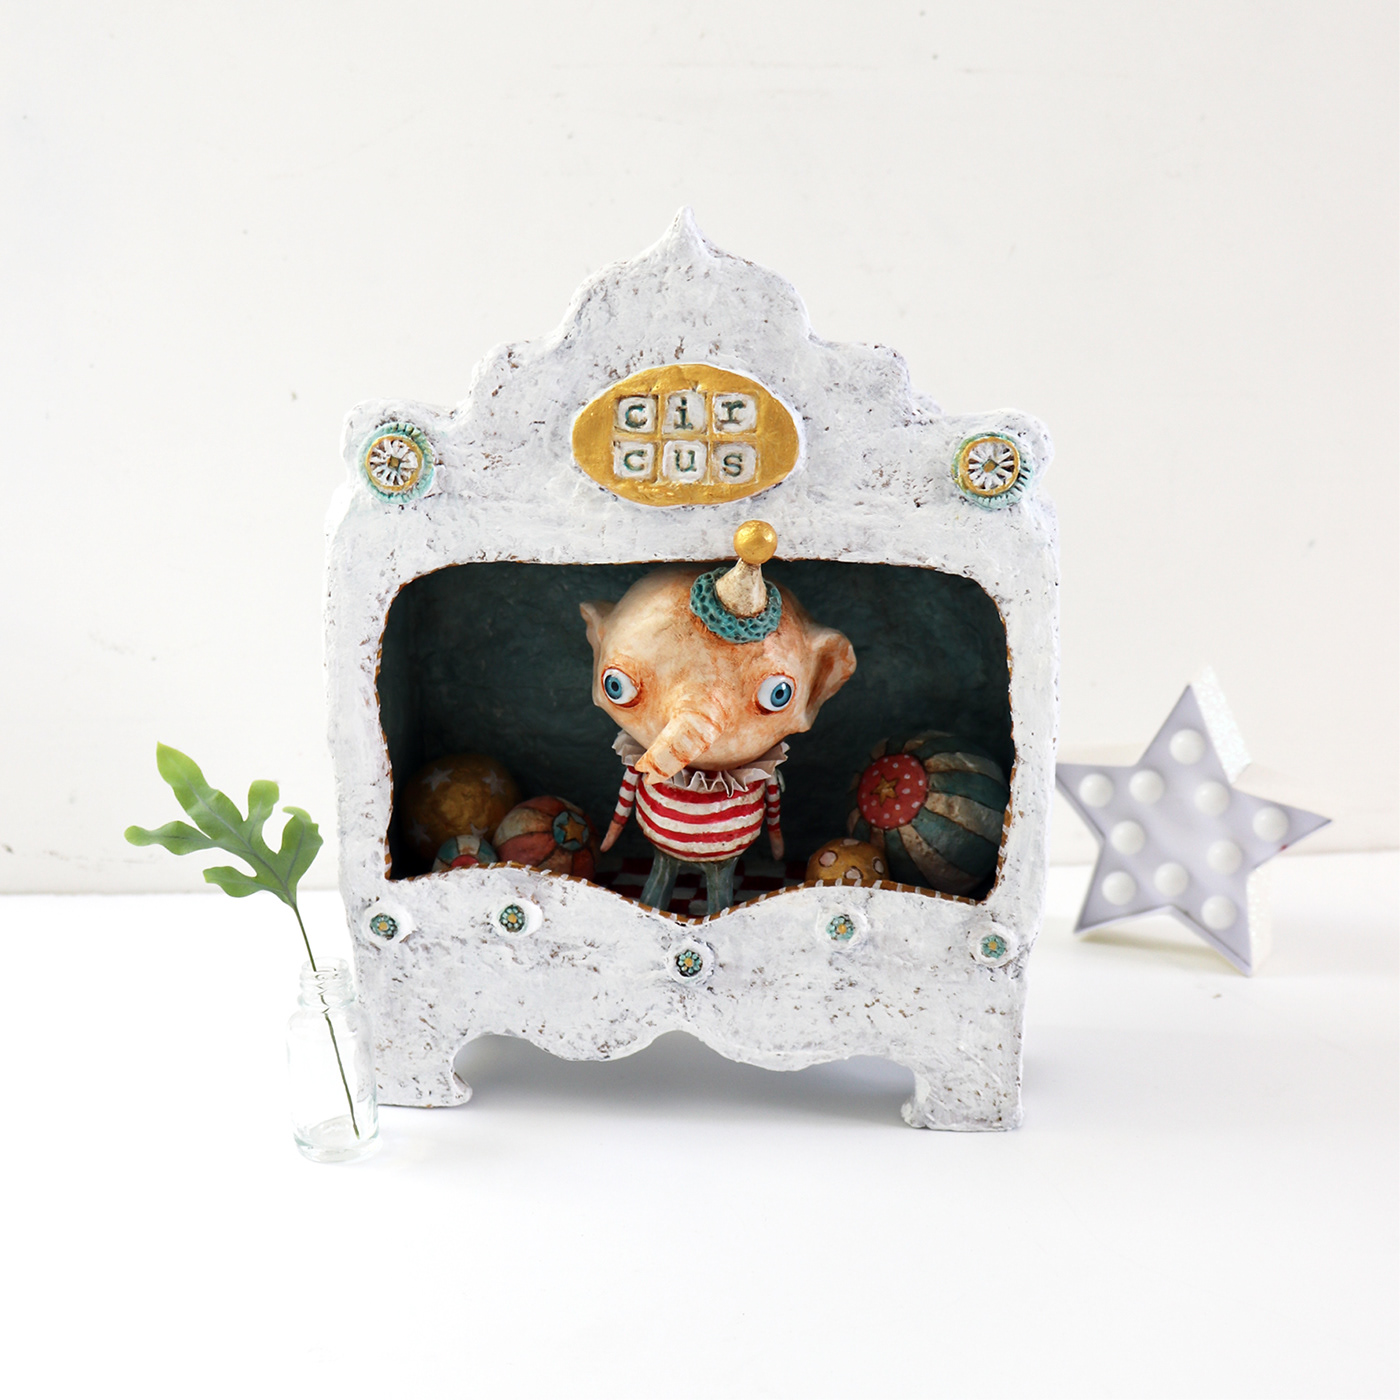 shadowbox cabinet sculpture elephant character circus theme